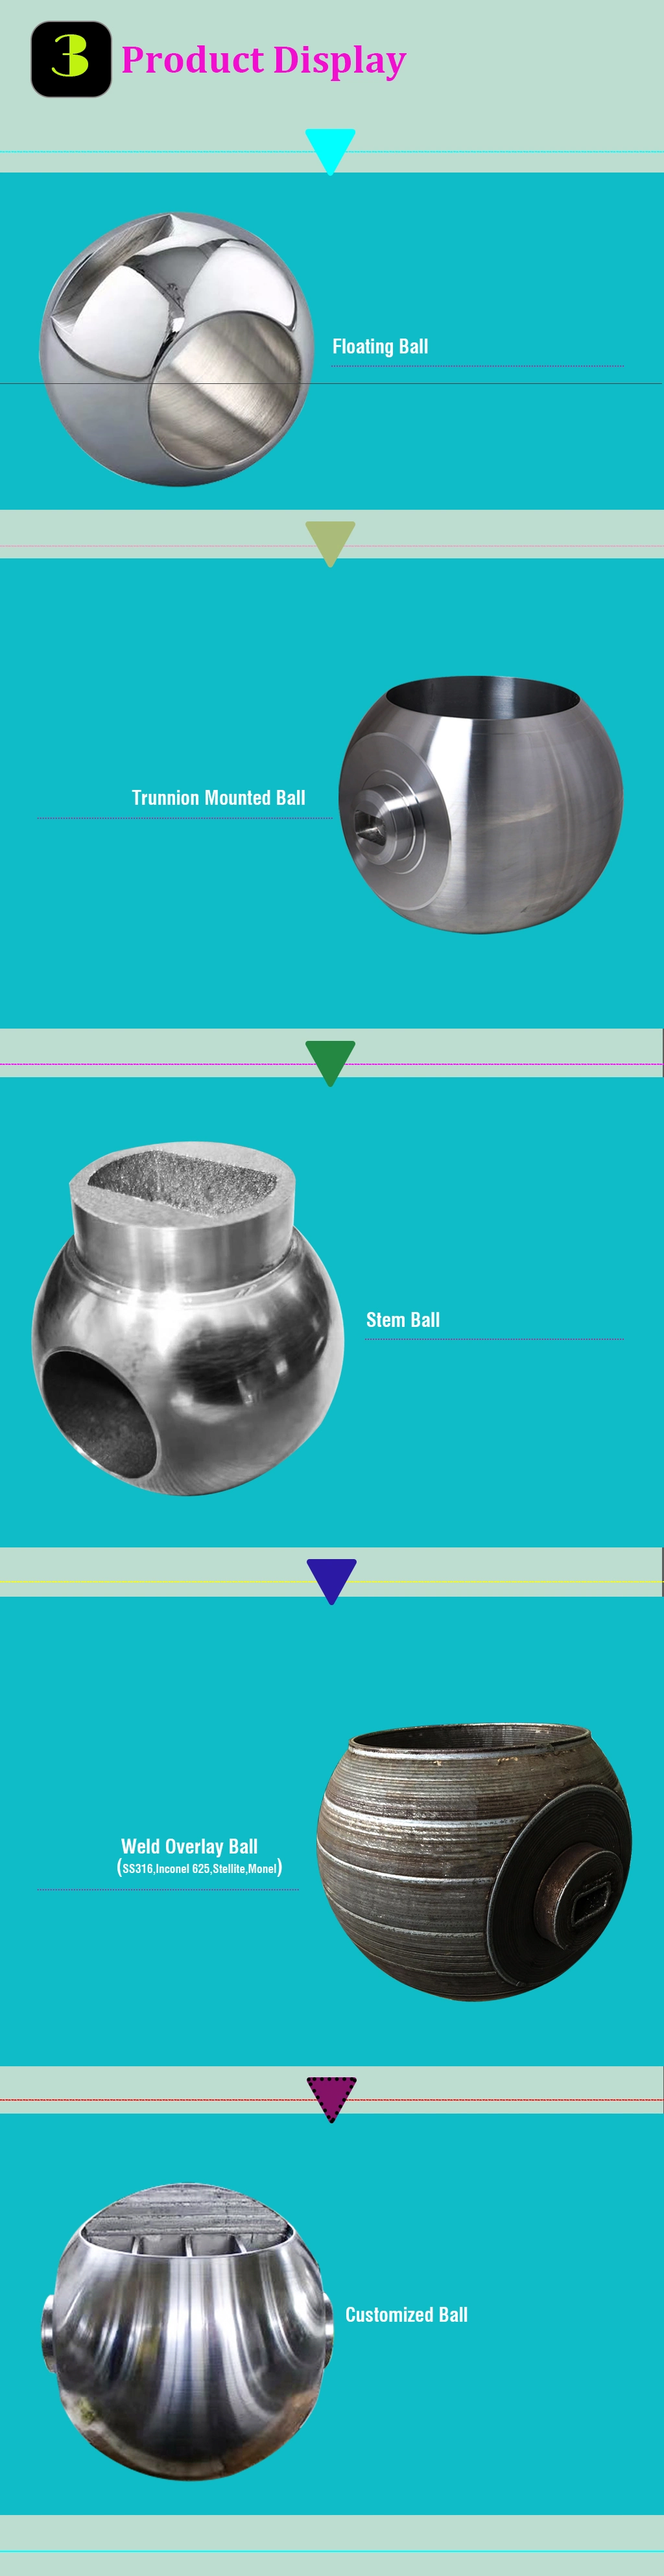 Customized Forged Stainless Steel A182 F304 F316 F51 Enp Valve Ball Machining